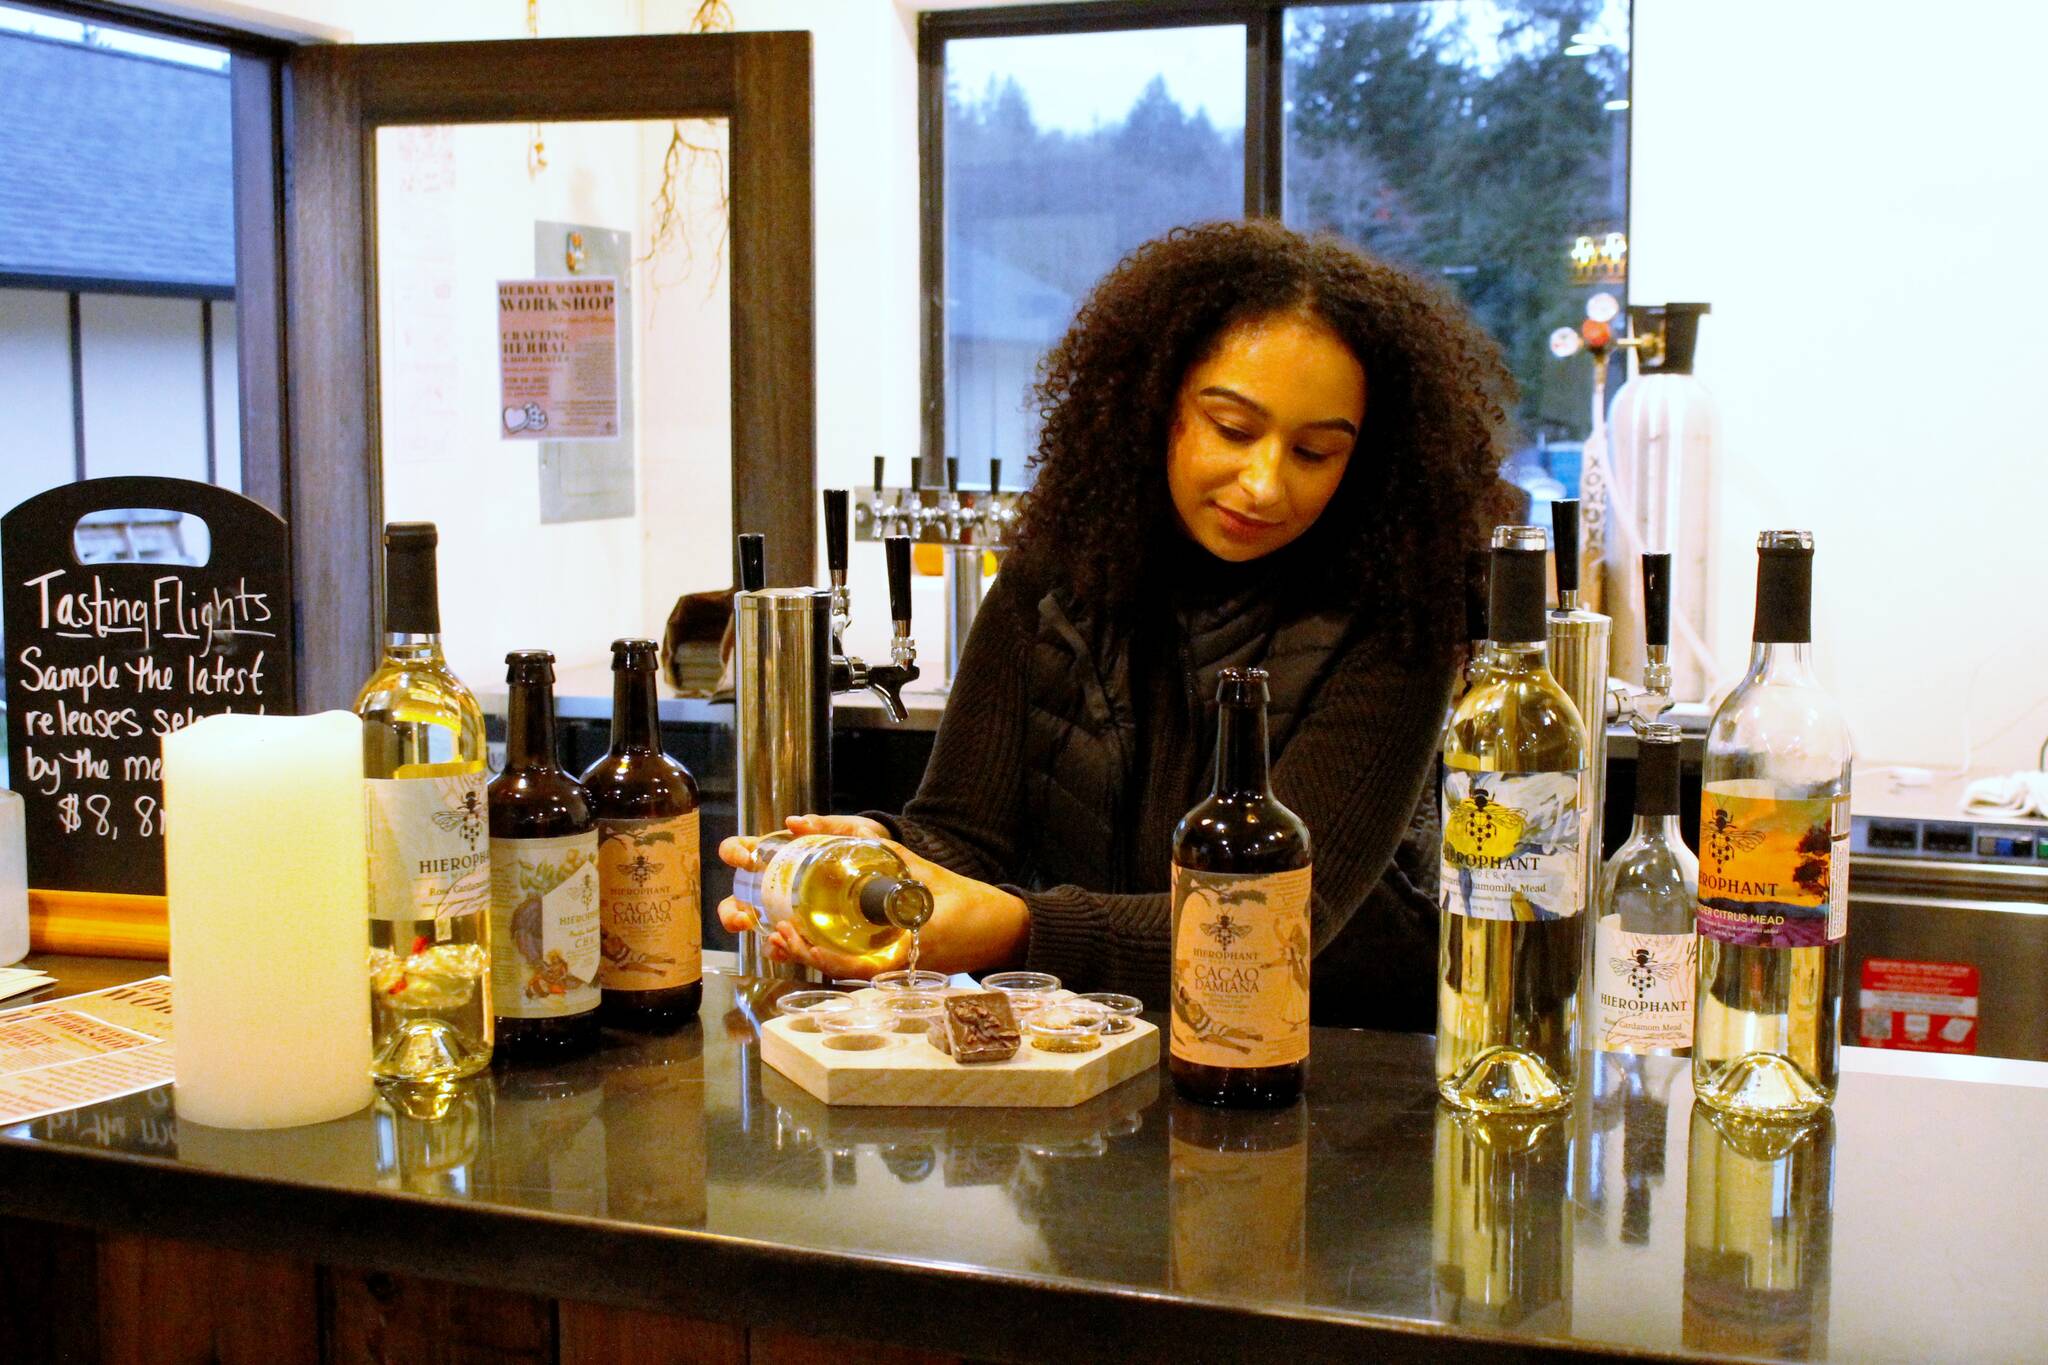 Photos by Kira Erickson/South Whidbey Record
Natasha Connaughton pours some mead at Hierophant Meadery in Freeland.